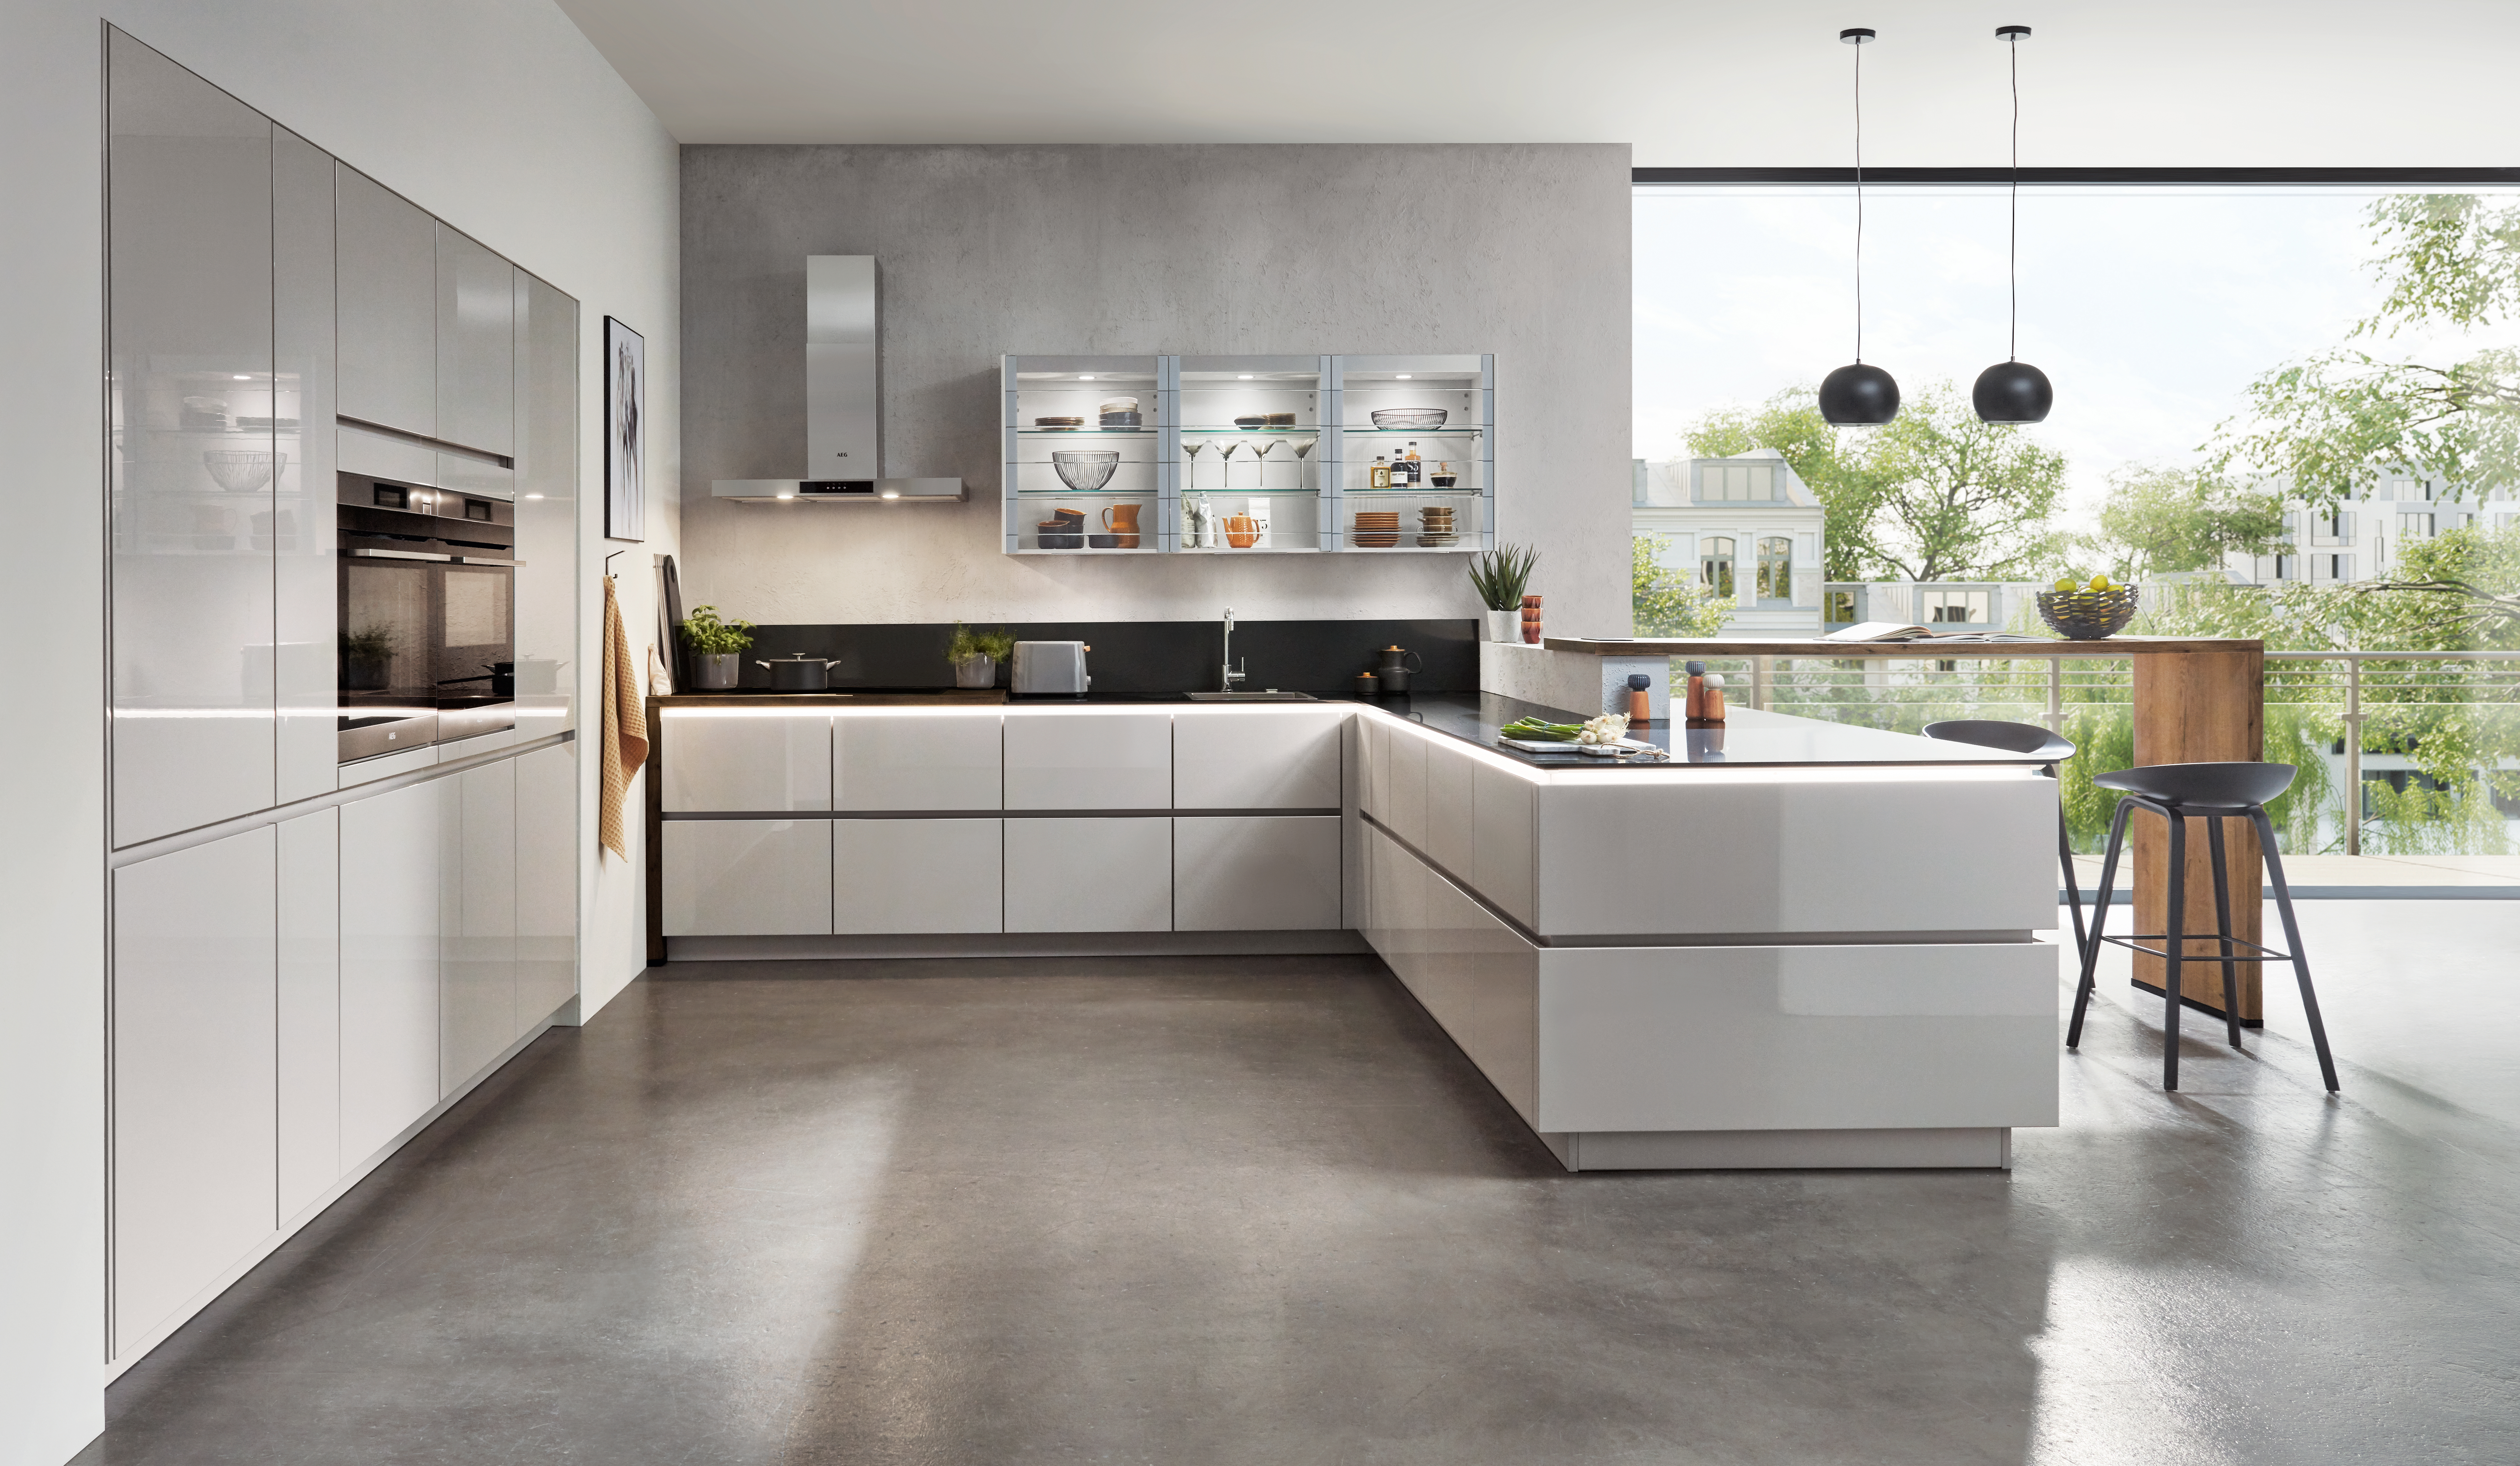 Gola Cabinets: A Modern Touch for Your Kitchen